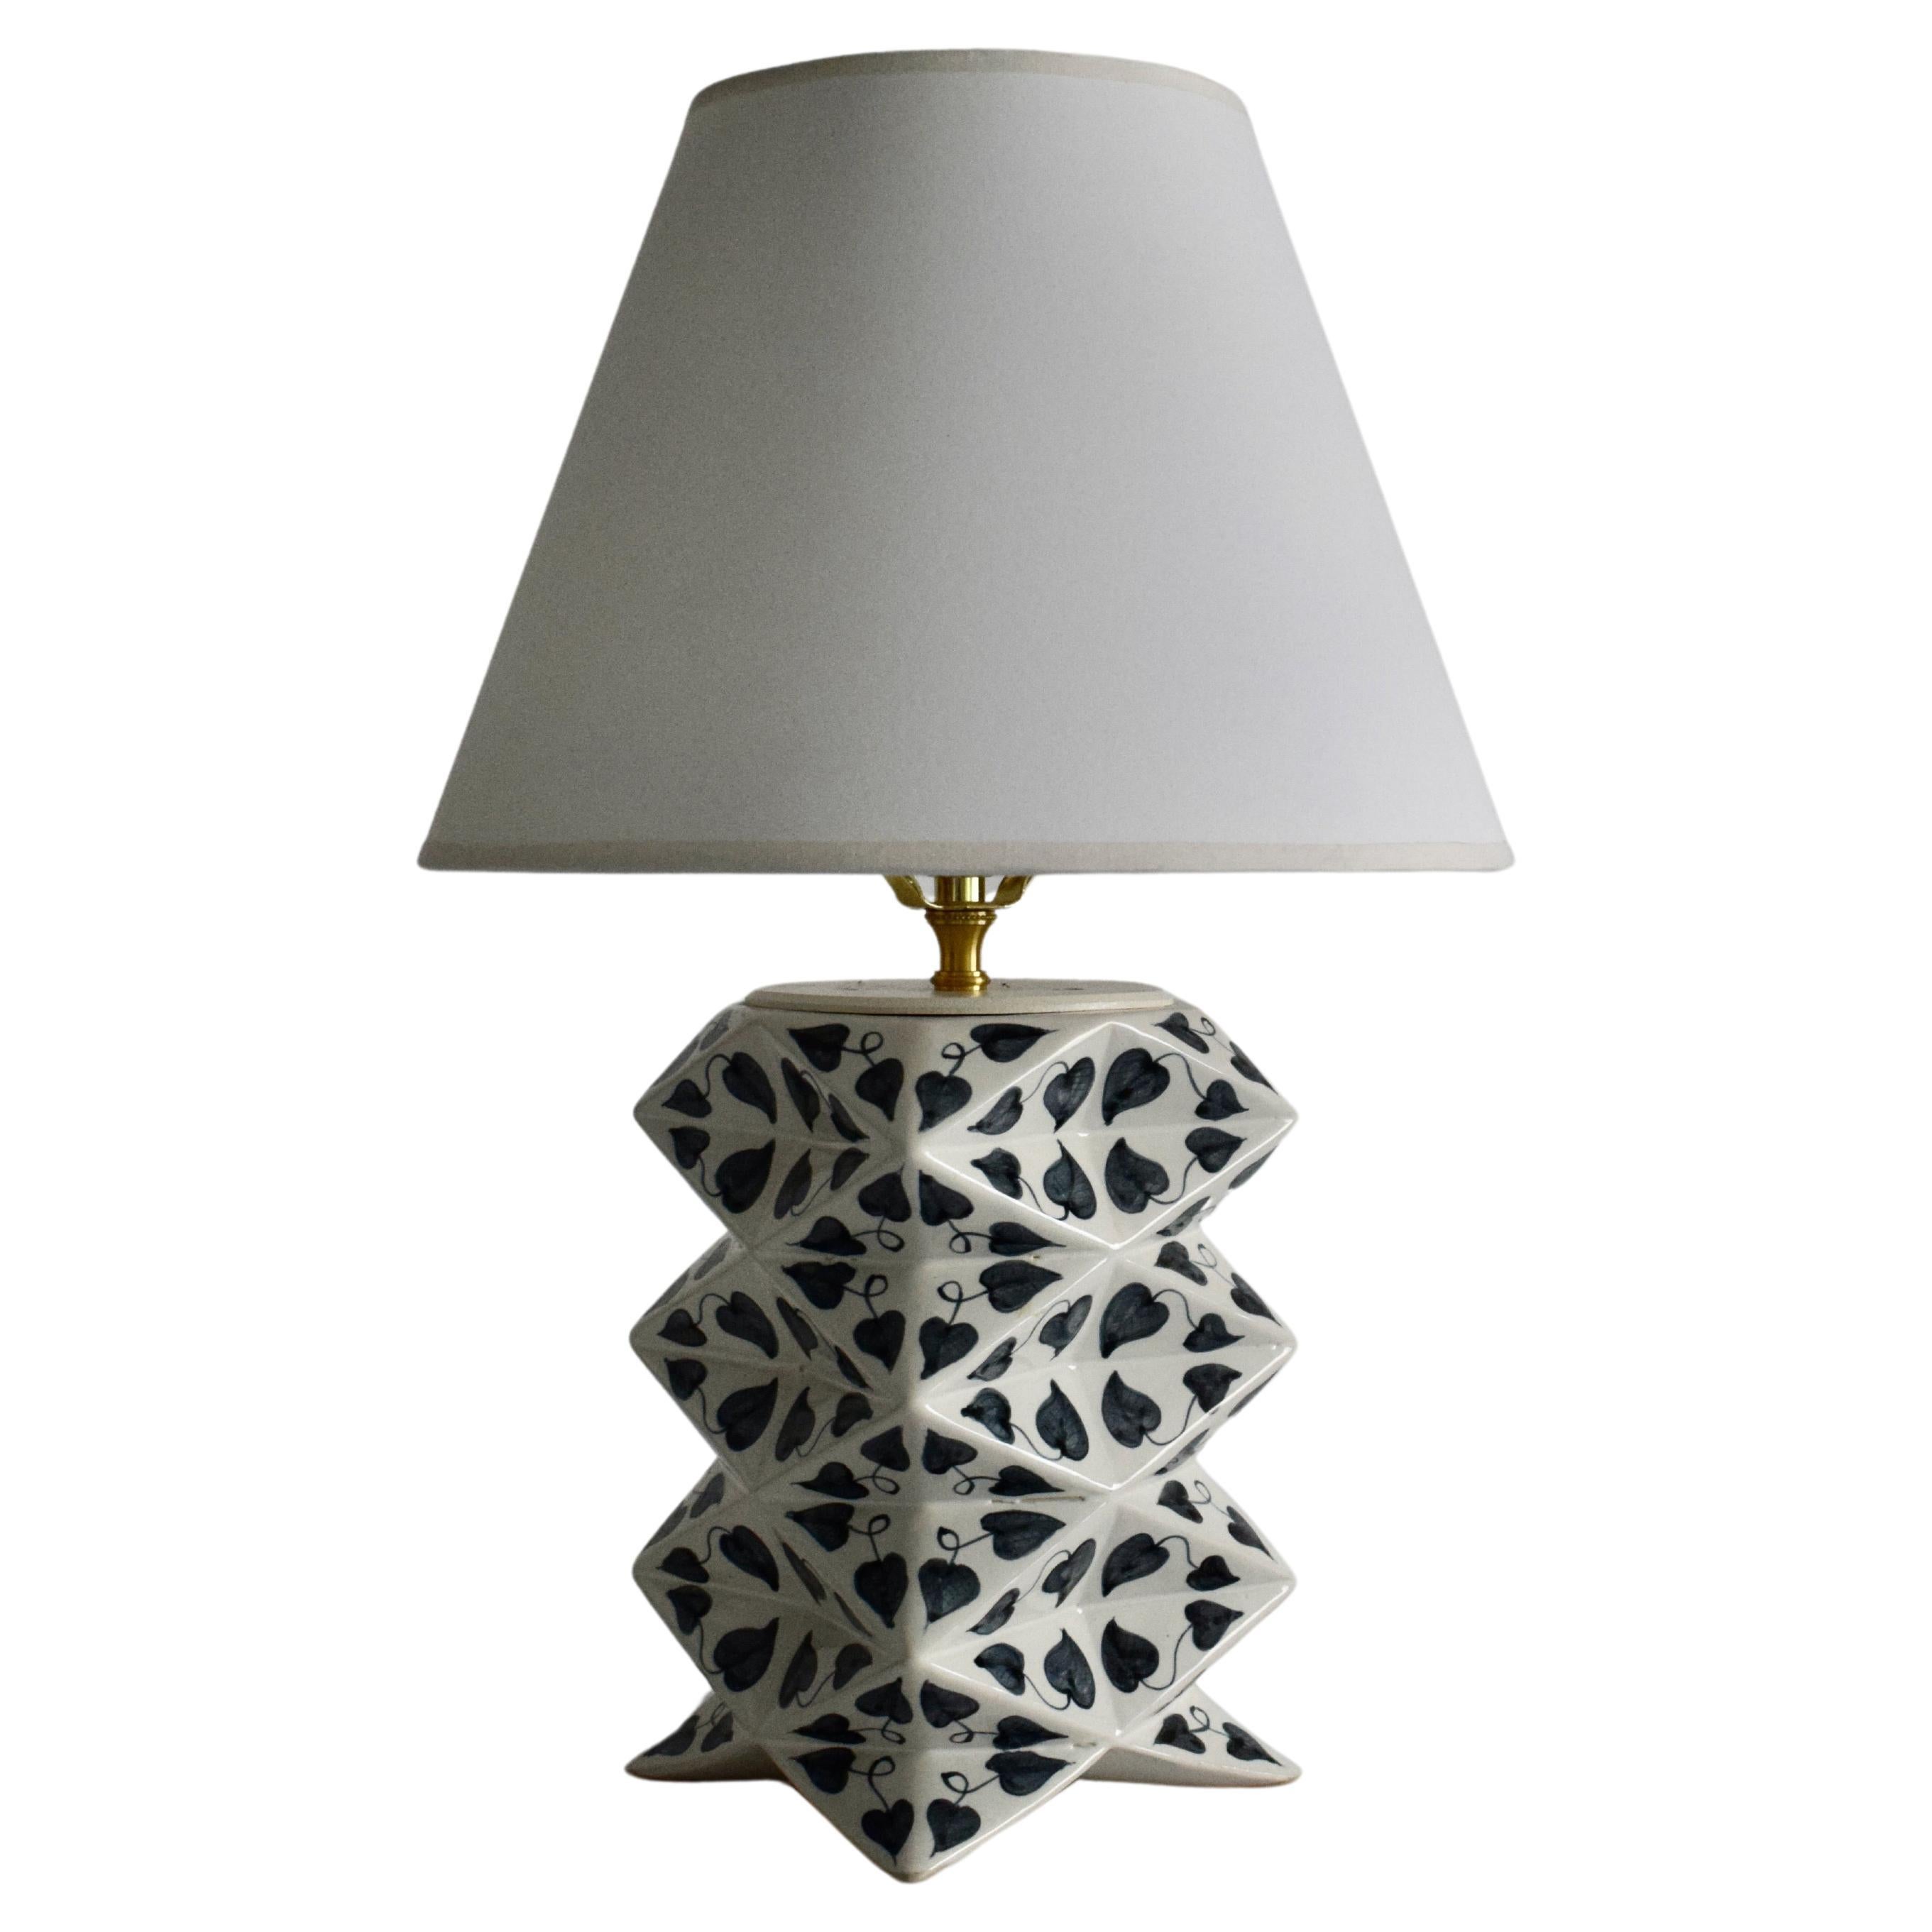 Hand-painted Ceramic Vietnamese Leaves Origami Table Lamp by James Hicks